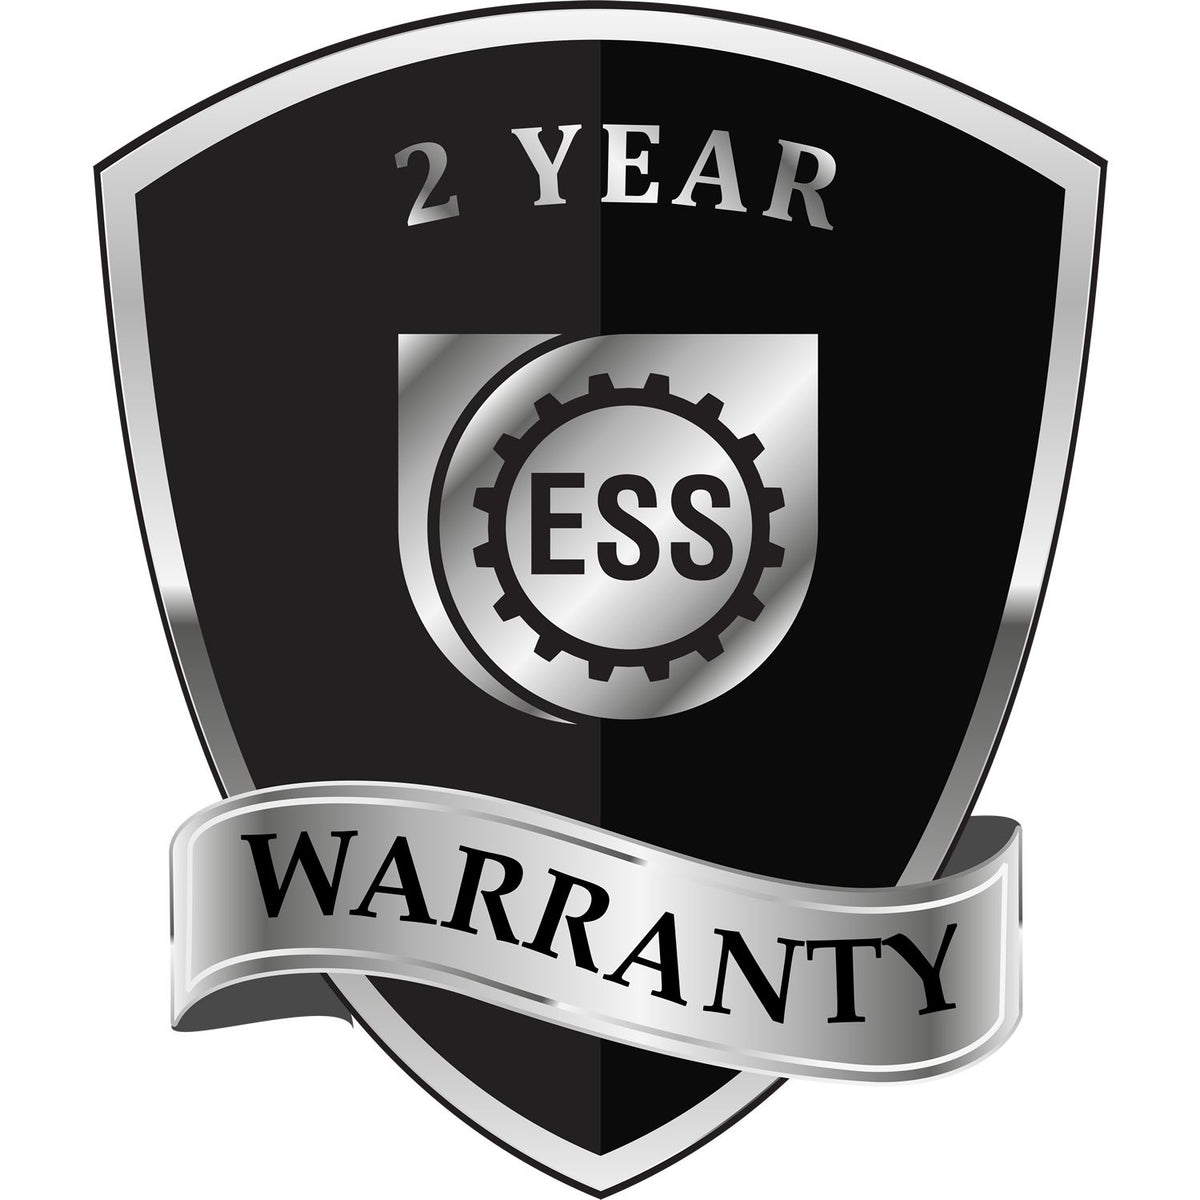 A black and silver badge or emblem showing warranty information for the Long Reach West Virginia Geology Seal